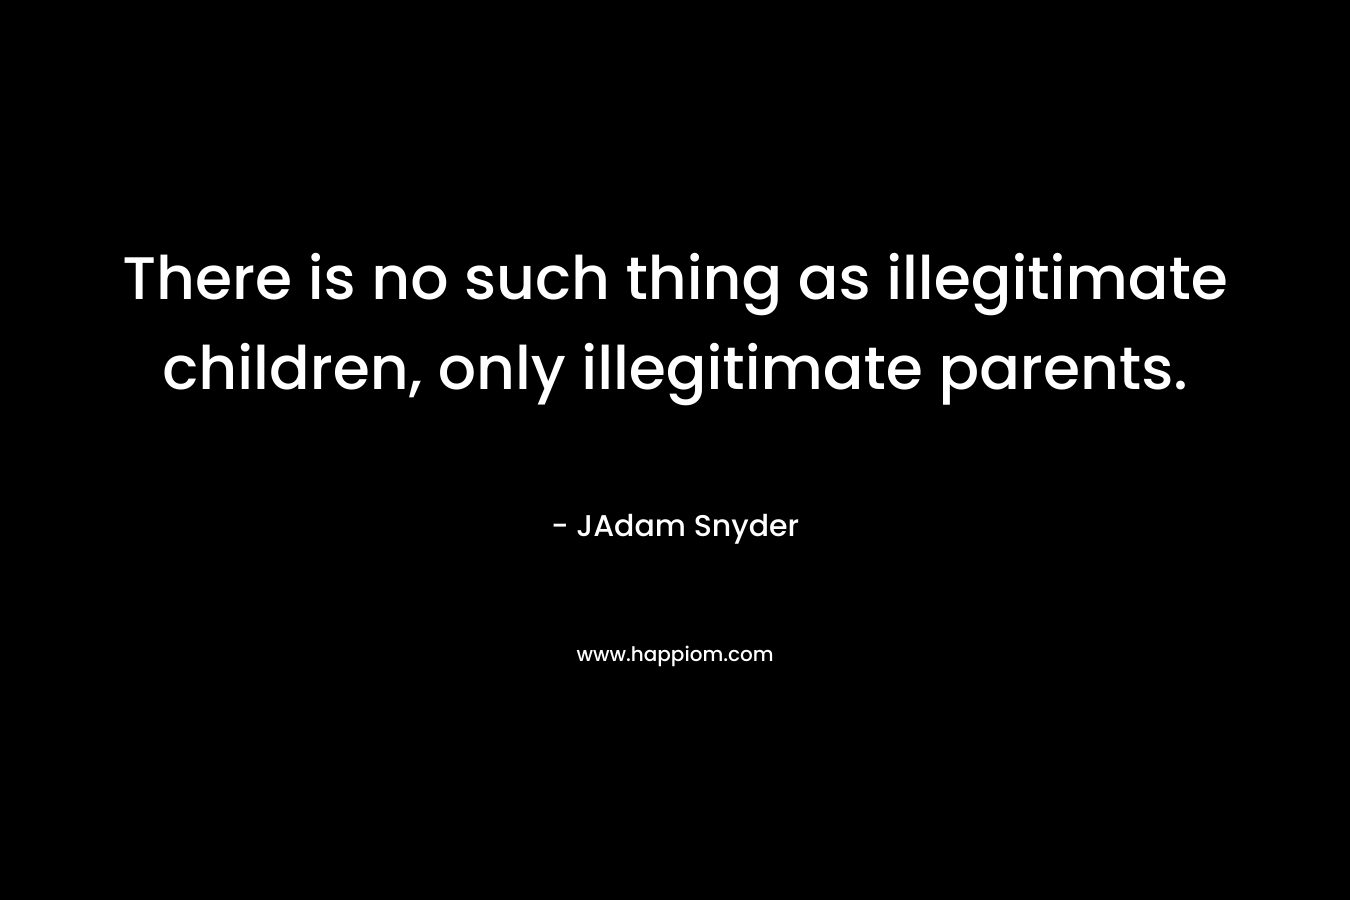 There is no such thing as illegitimate children, only illegitimate parents.